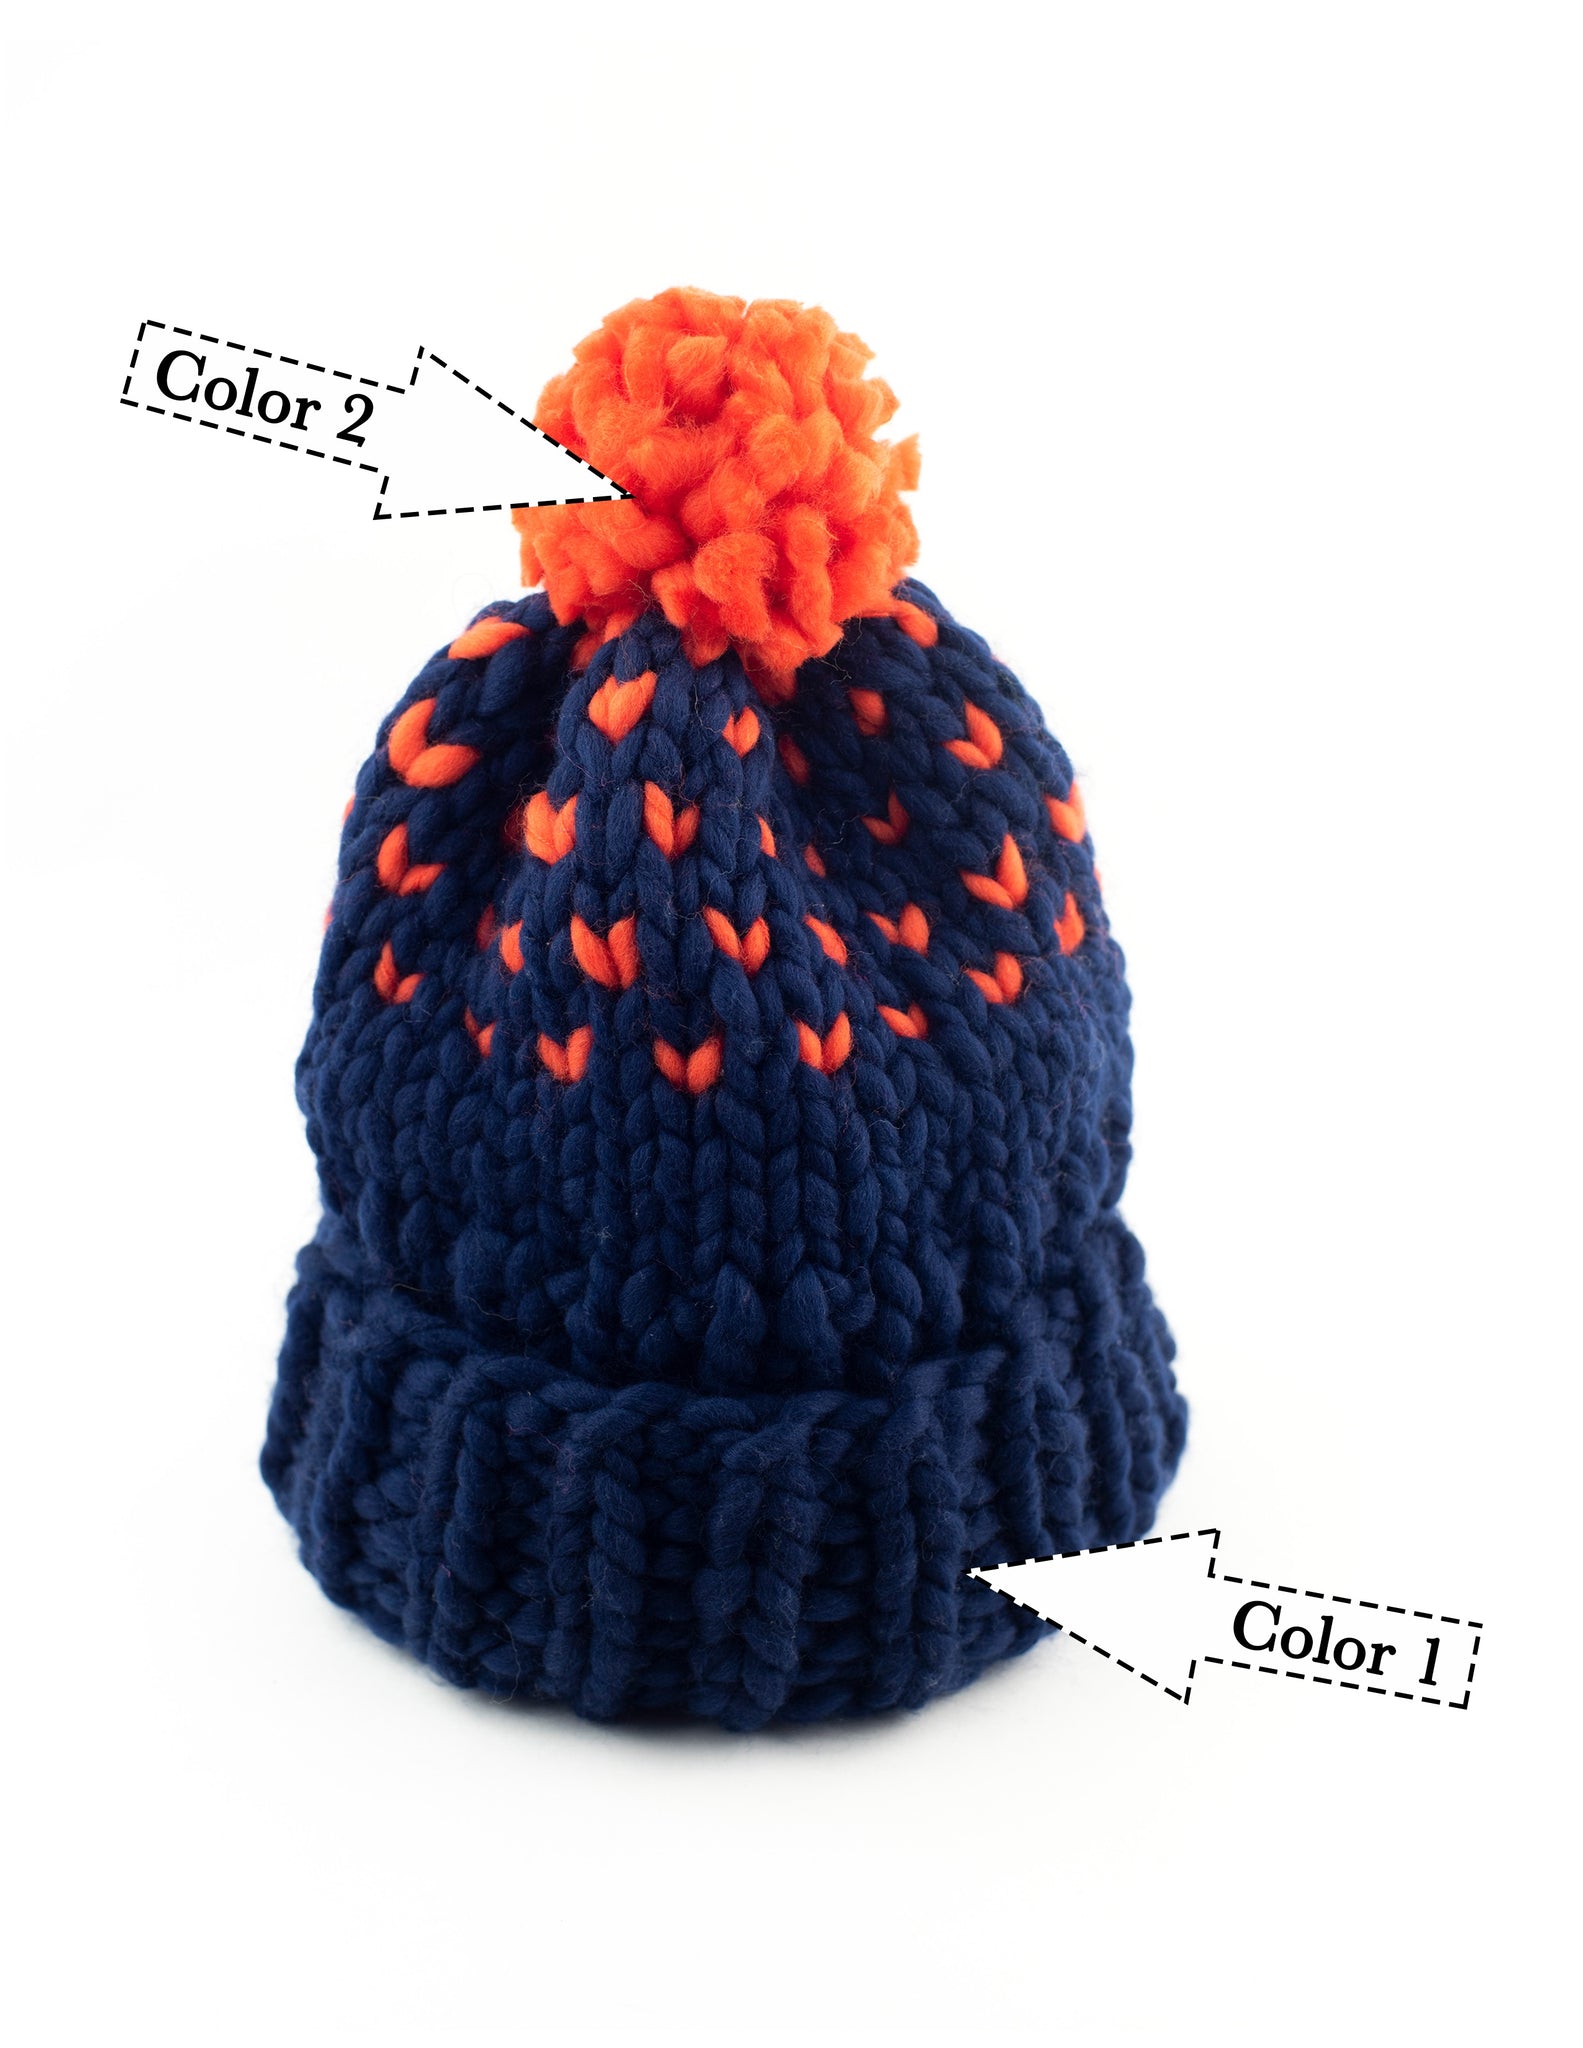 Edelweiss Pompom Hat with 2 colors - Merino